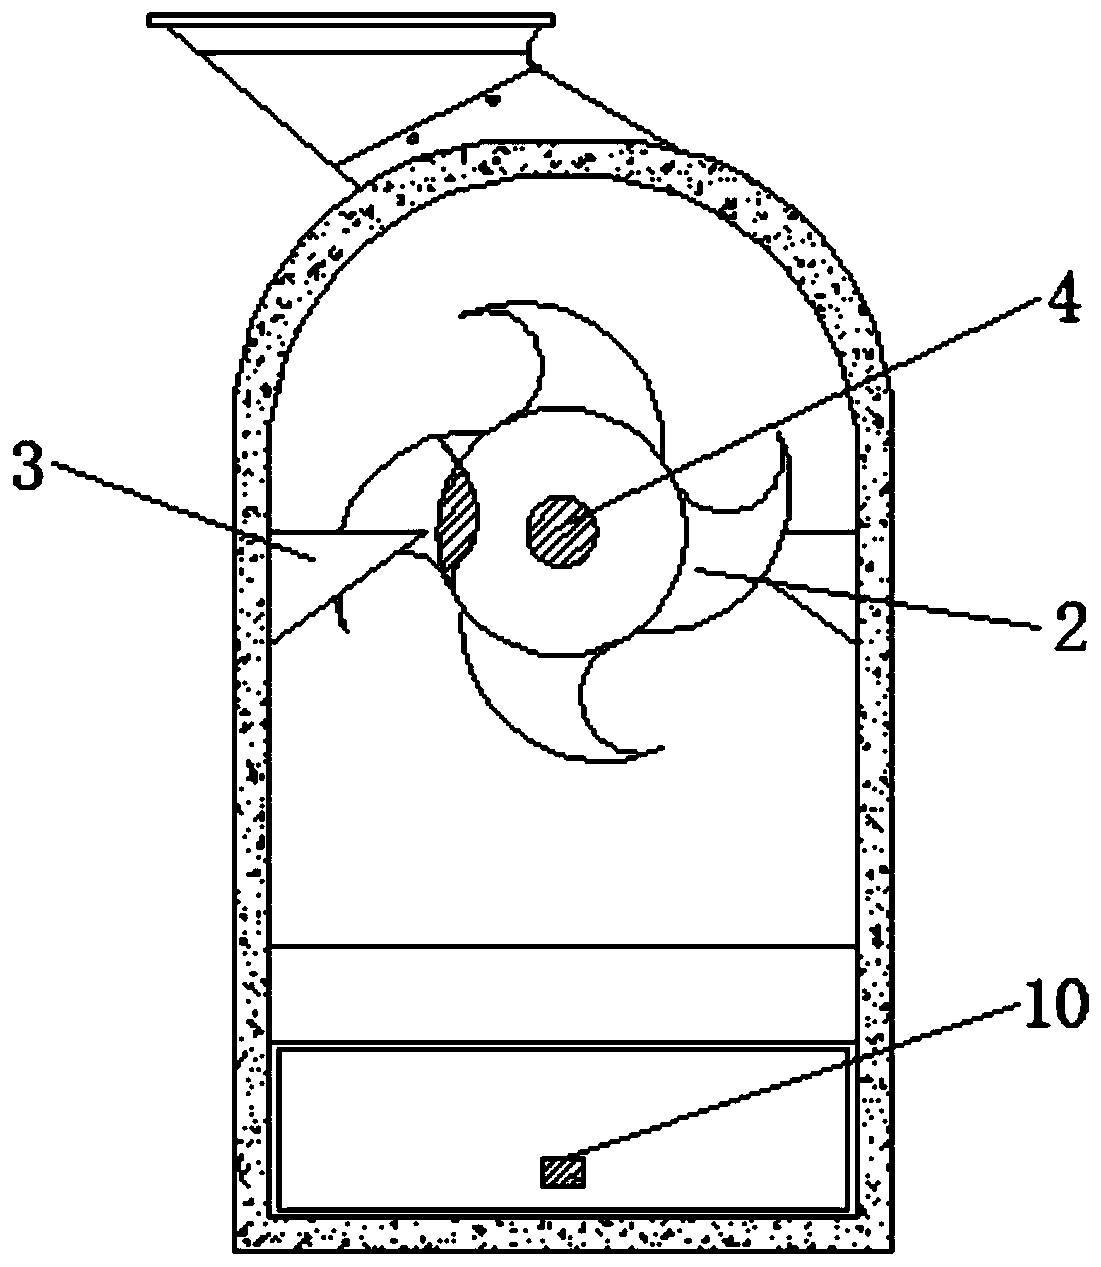 Straw incineration device based on special-shaped gear transmission principle